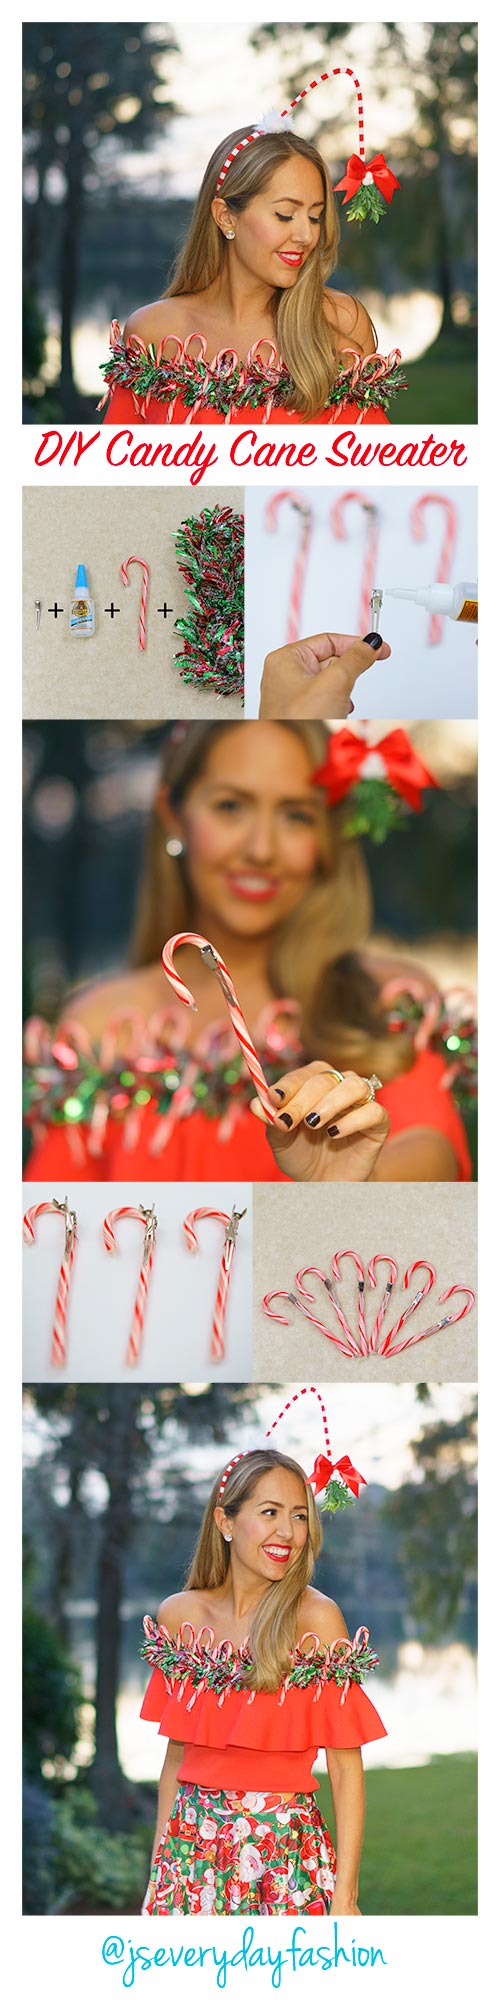 DIY Sweater Clips for Your Vintage Holiday Finest - DIY Candy